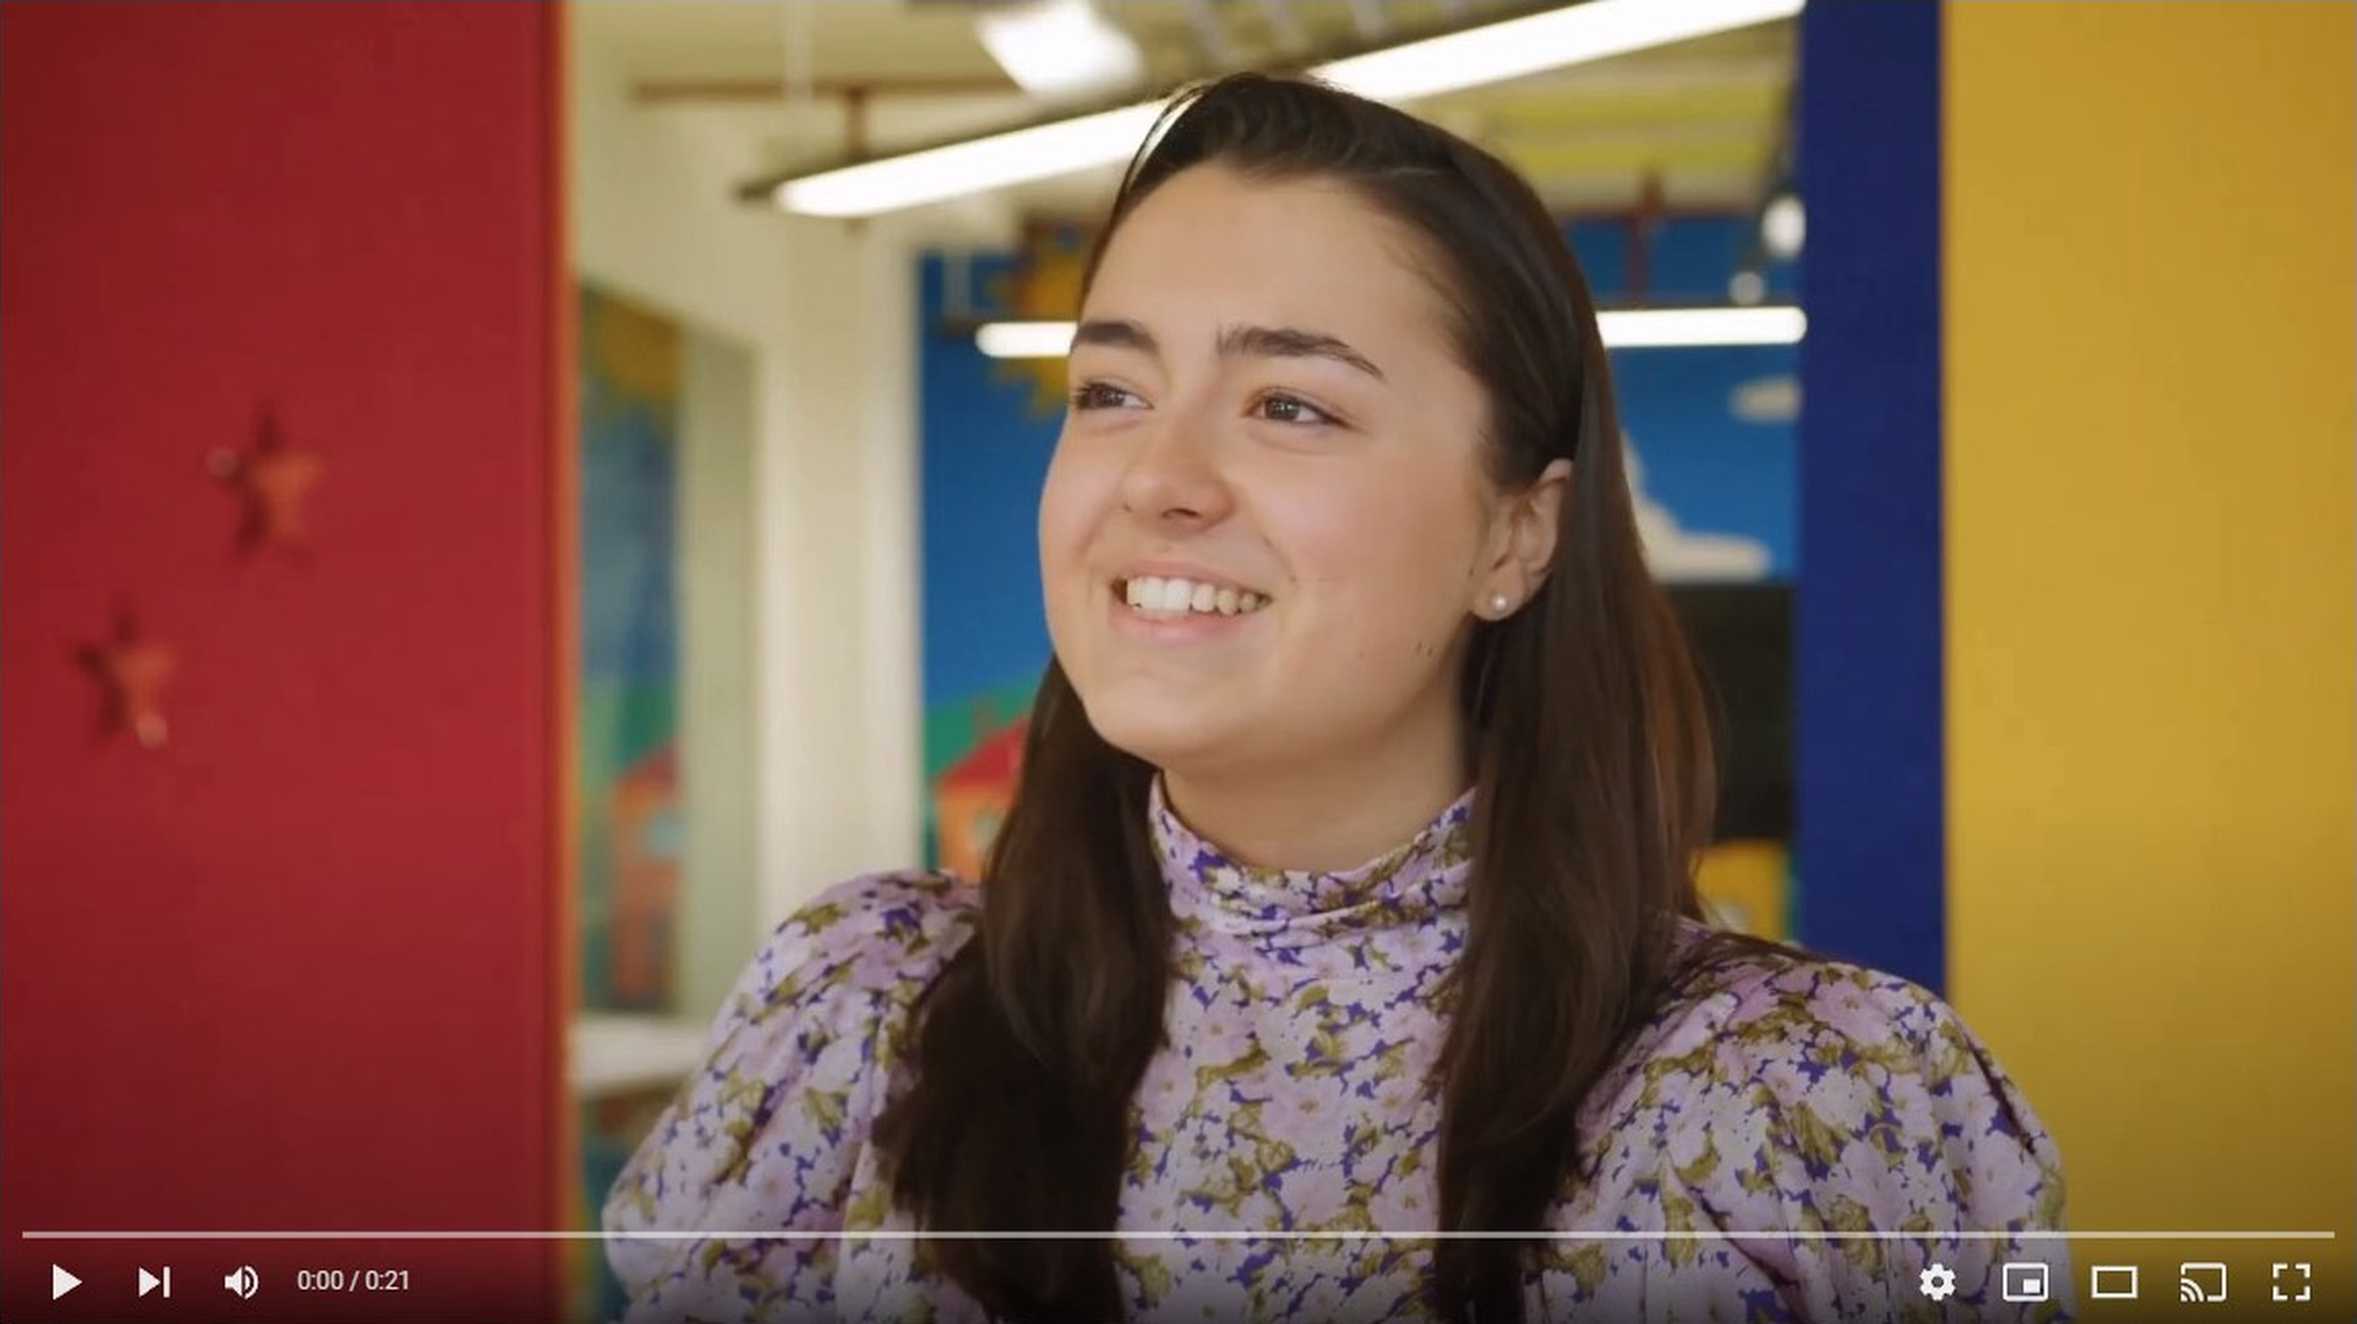 A still taken from an interview with STARboard member, Sara, conducted in the playground at Make-A-Wish UK's Reading hub.